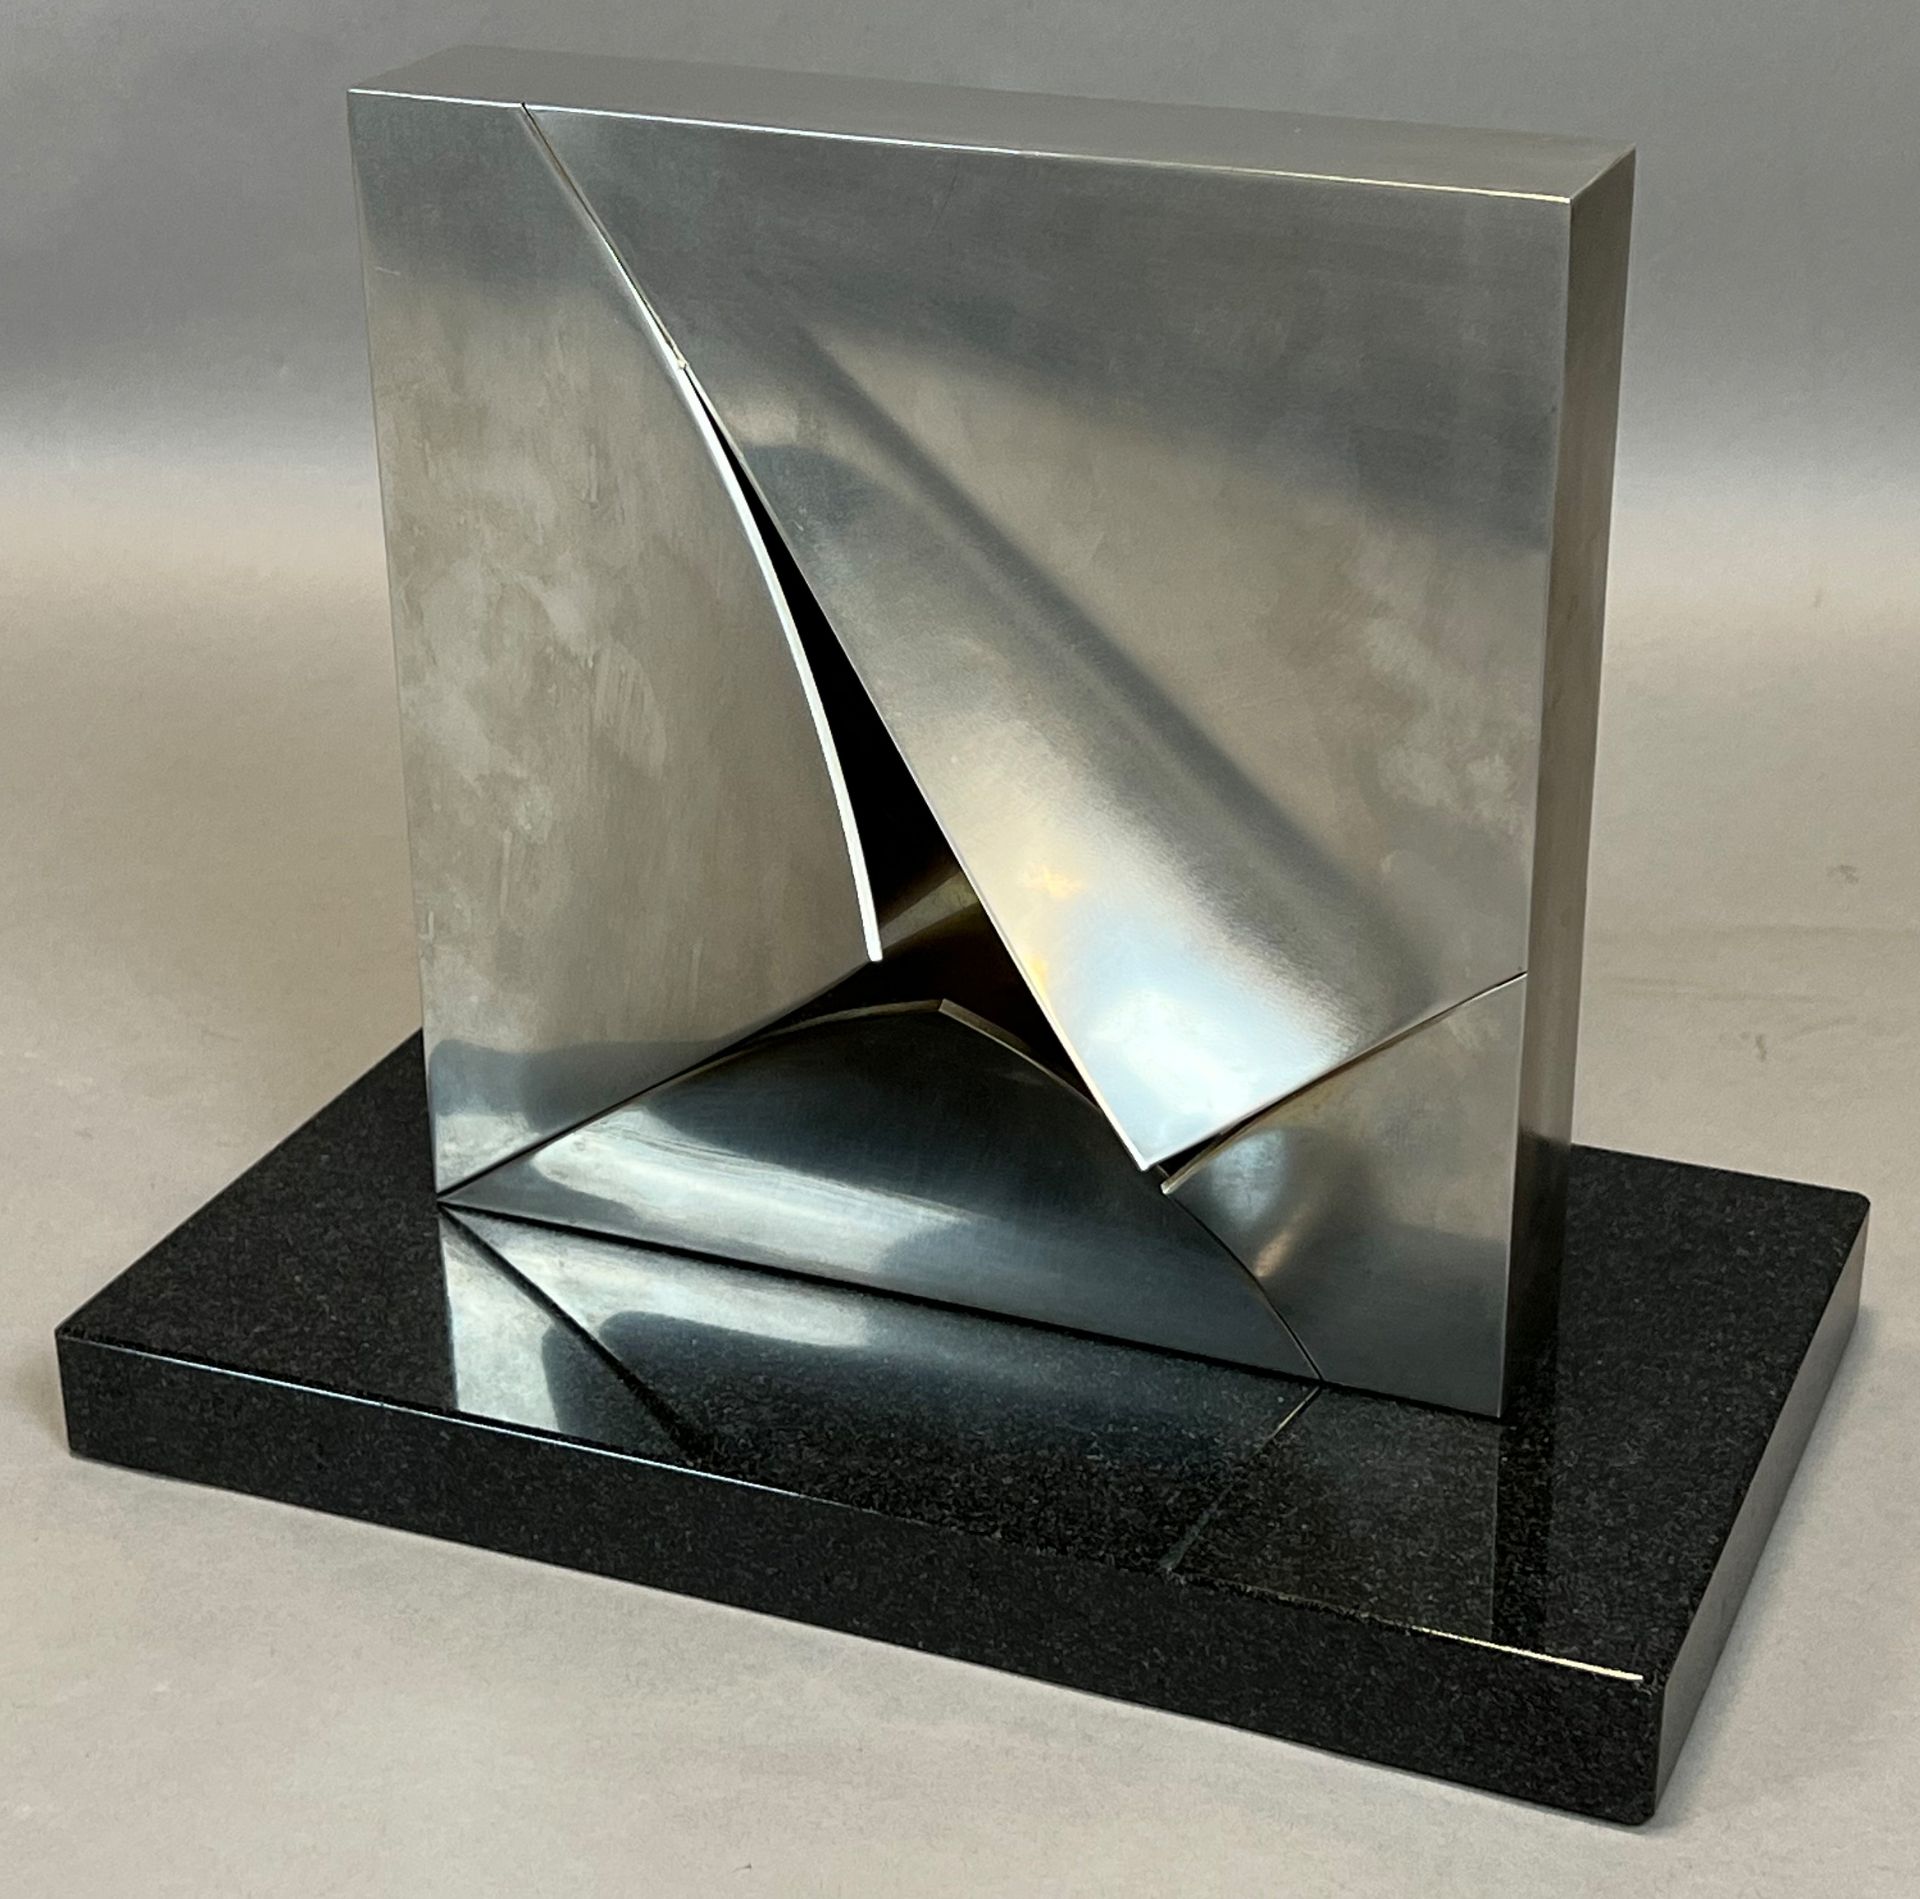 Erich HAUSER (1930 - 2004). 18/81. Steel object on marble base. - Image 4 of 5